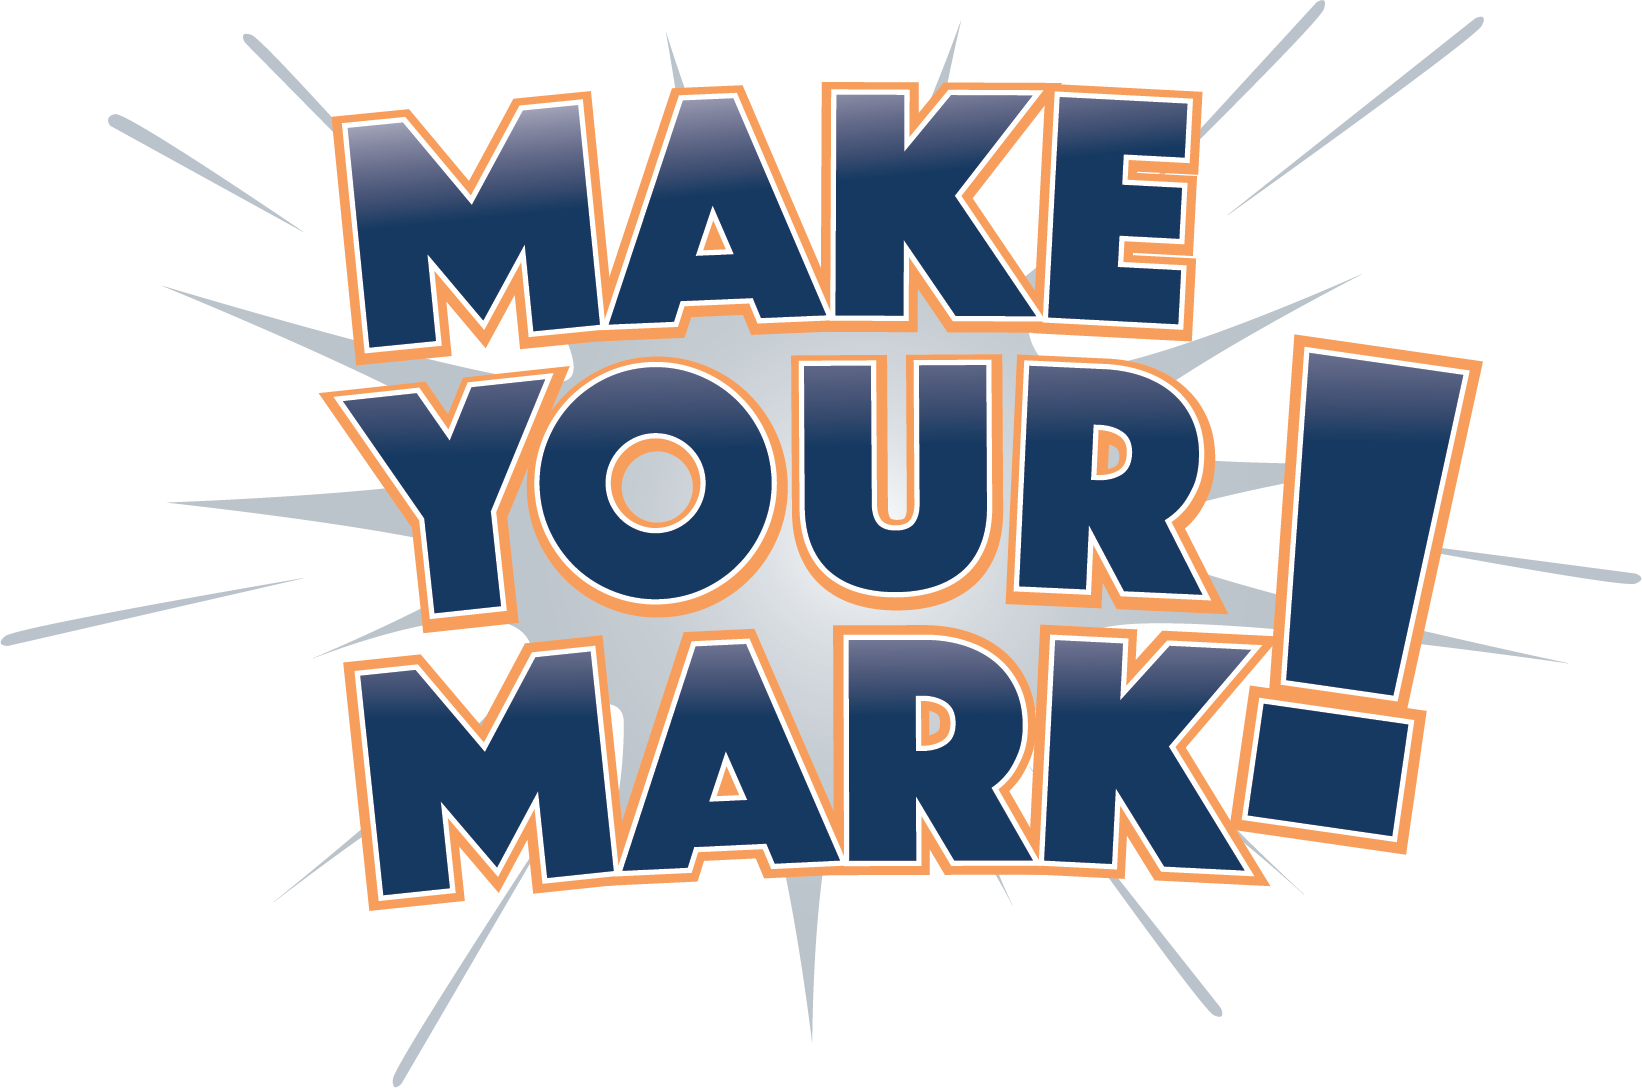 Make Your Mark! logo in a blue font with an orange outline